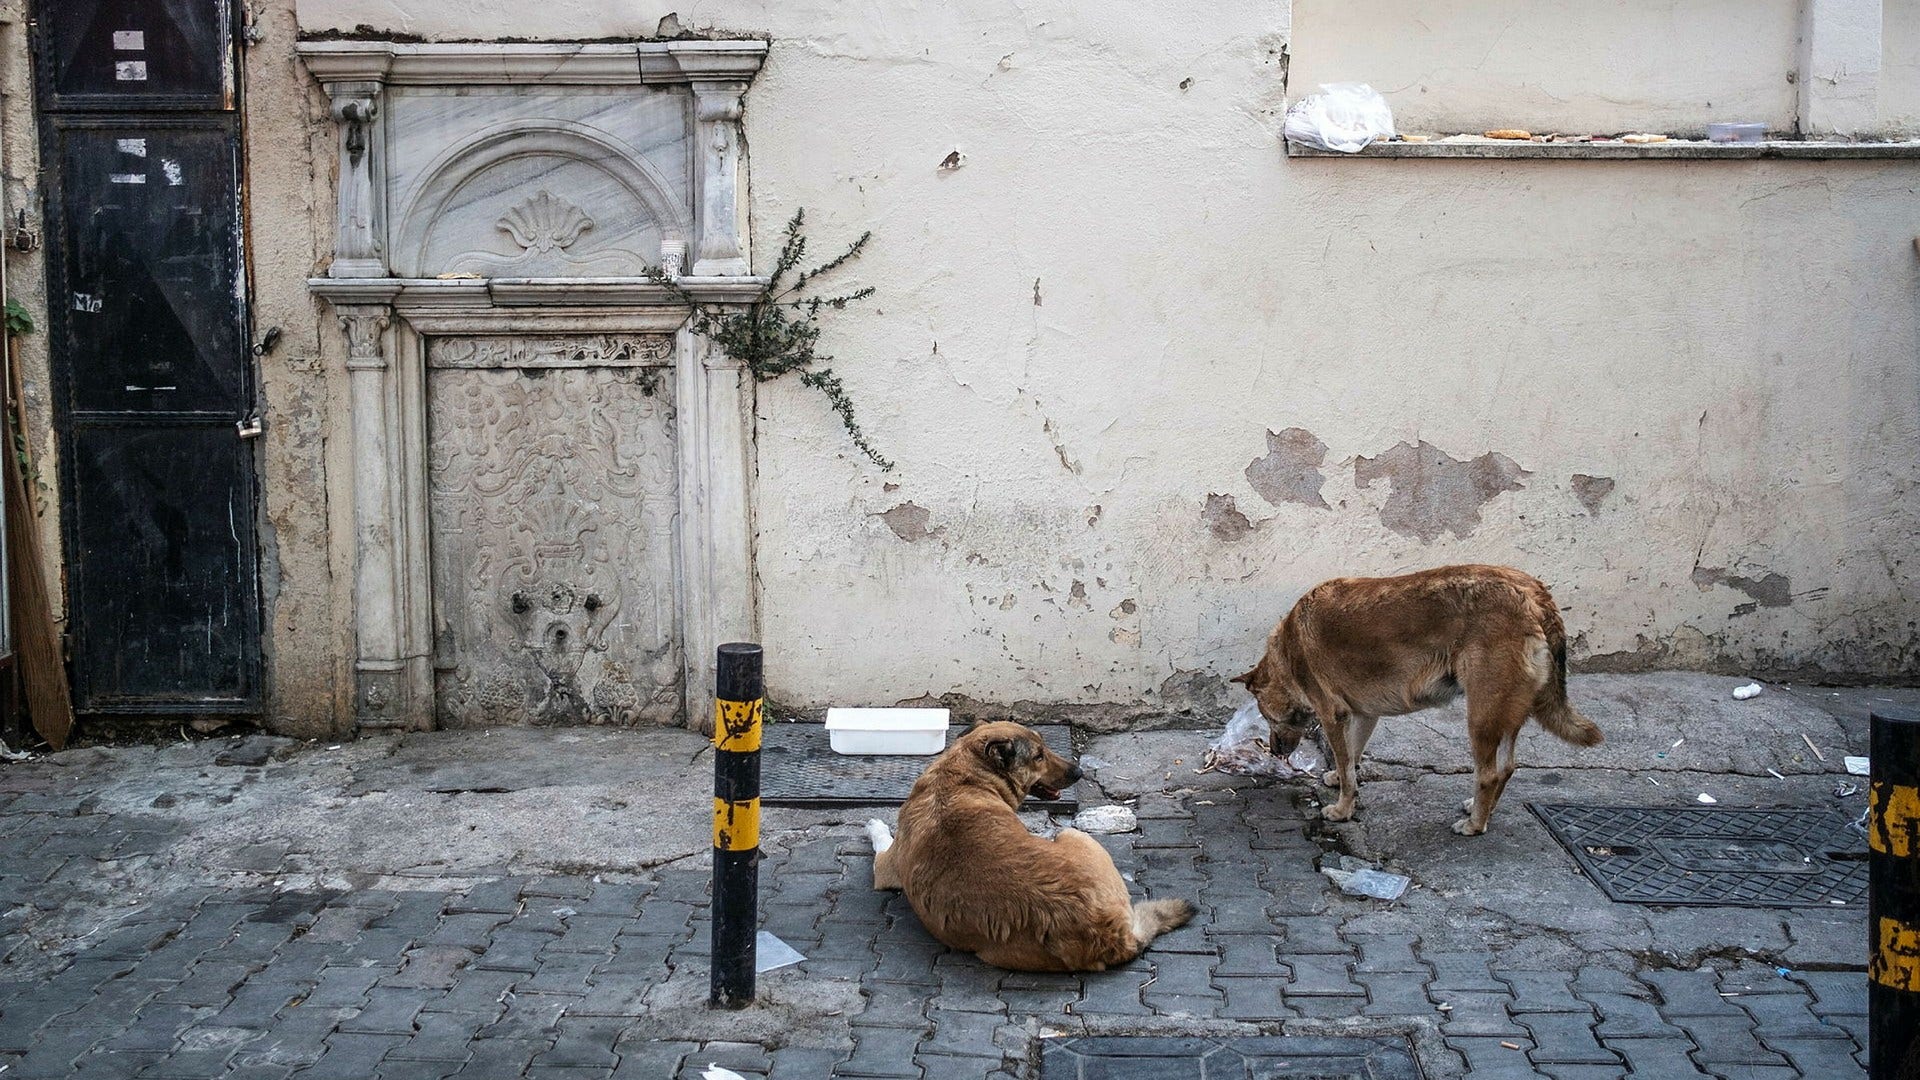 Türkiye wants to euthanize homeless dogs that have not been adopted